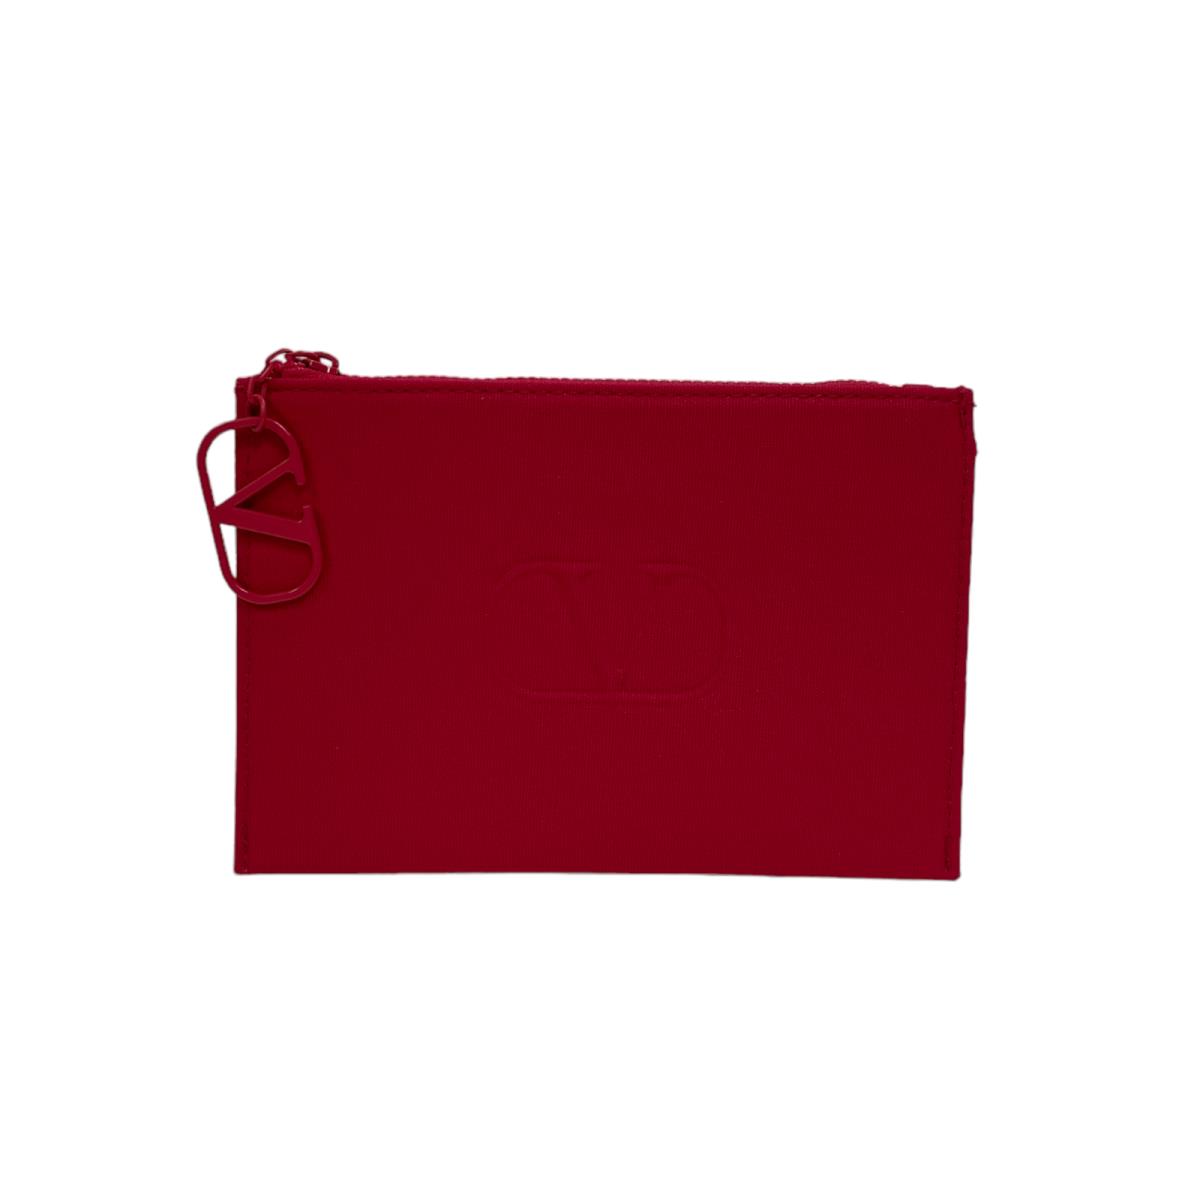 Valentino Makeup Pouch Red Body Material: Cotton 7in x 5